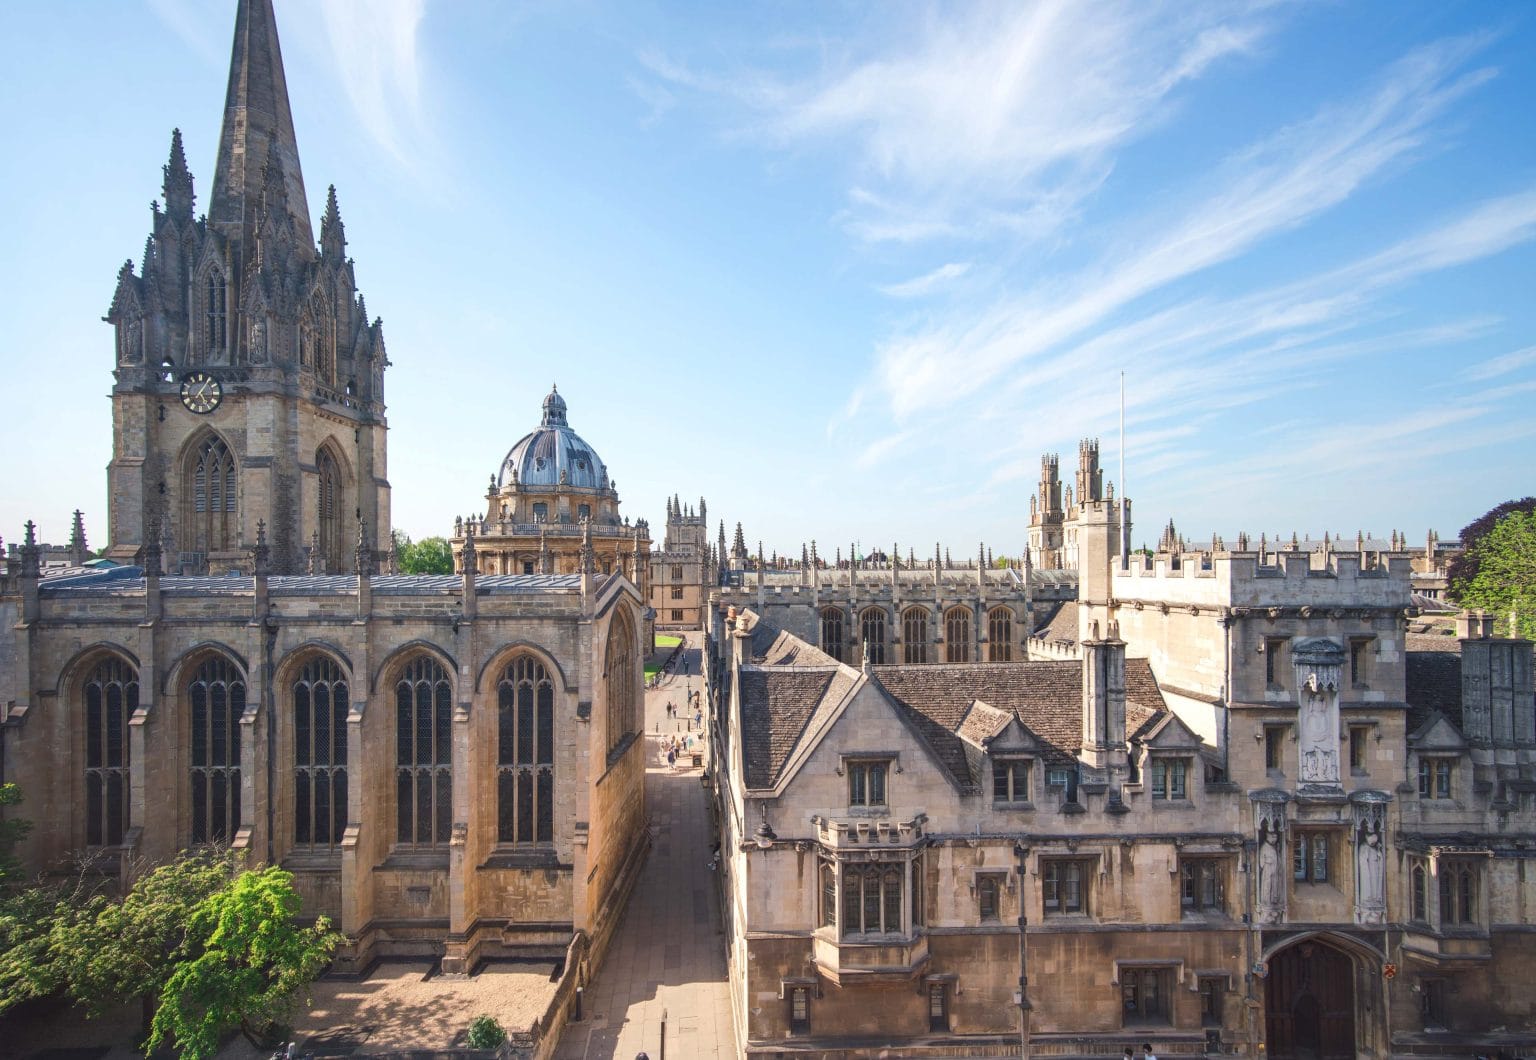 0002 - 2018 - Old Bank Hotel - Oxford - High Res - Room 1 Private Balcony View - Web Hero